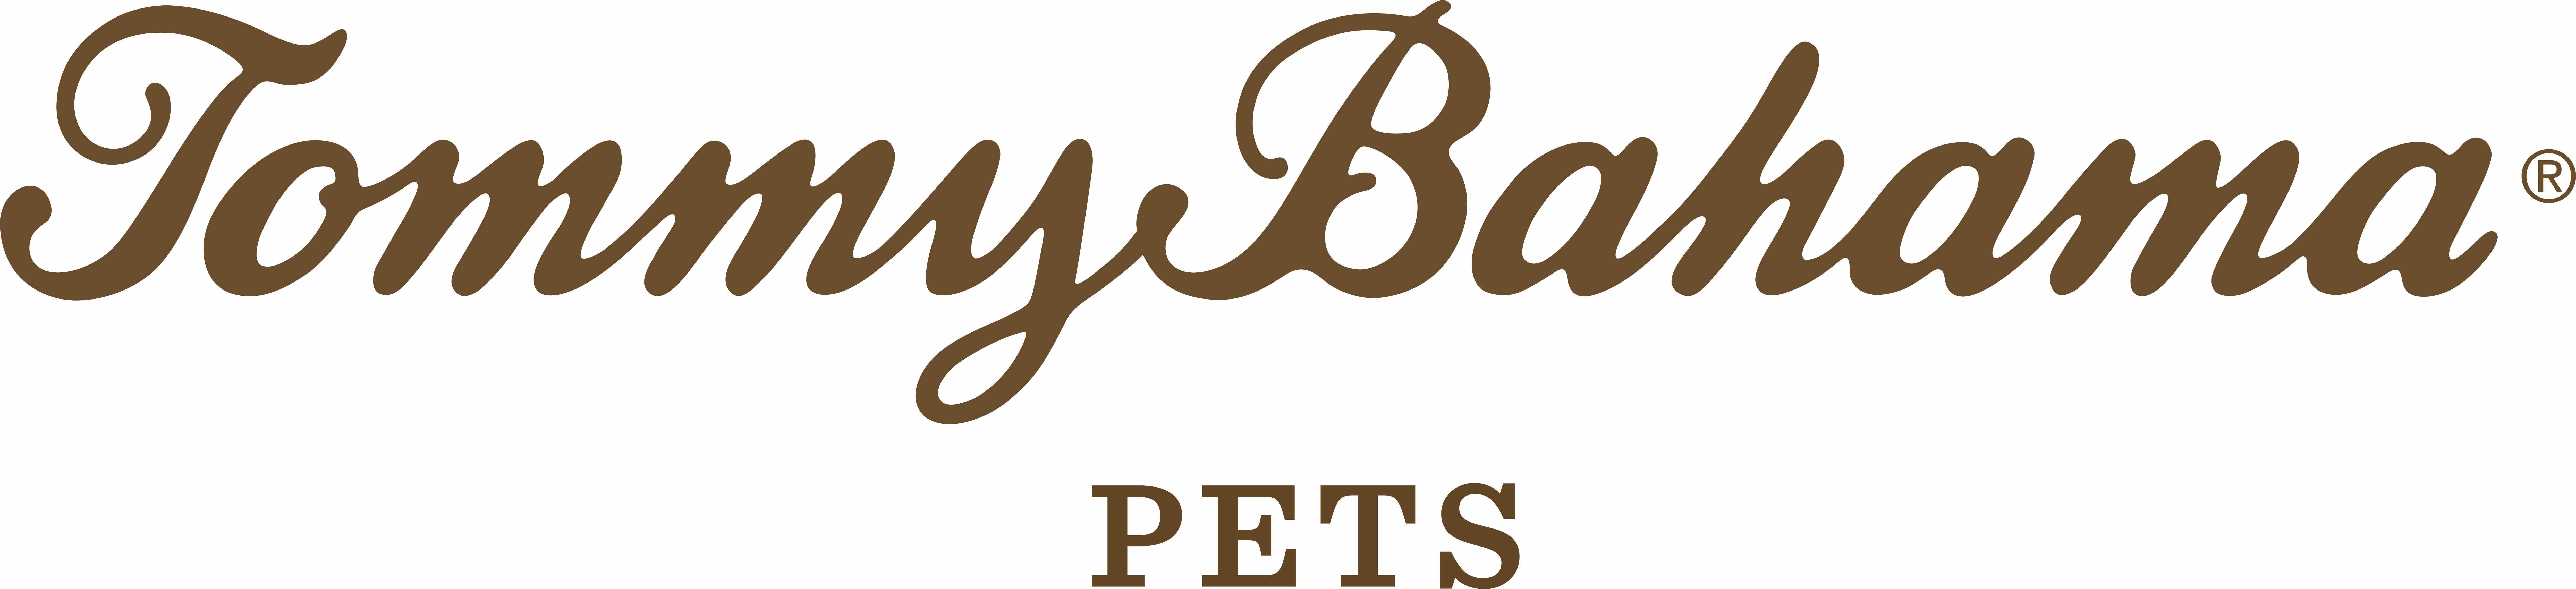 Tommy Bahama® Relaxed Island Lifestyle Now Available for Pets with ...